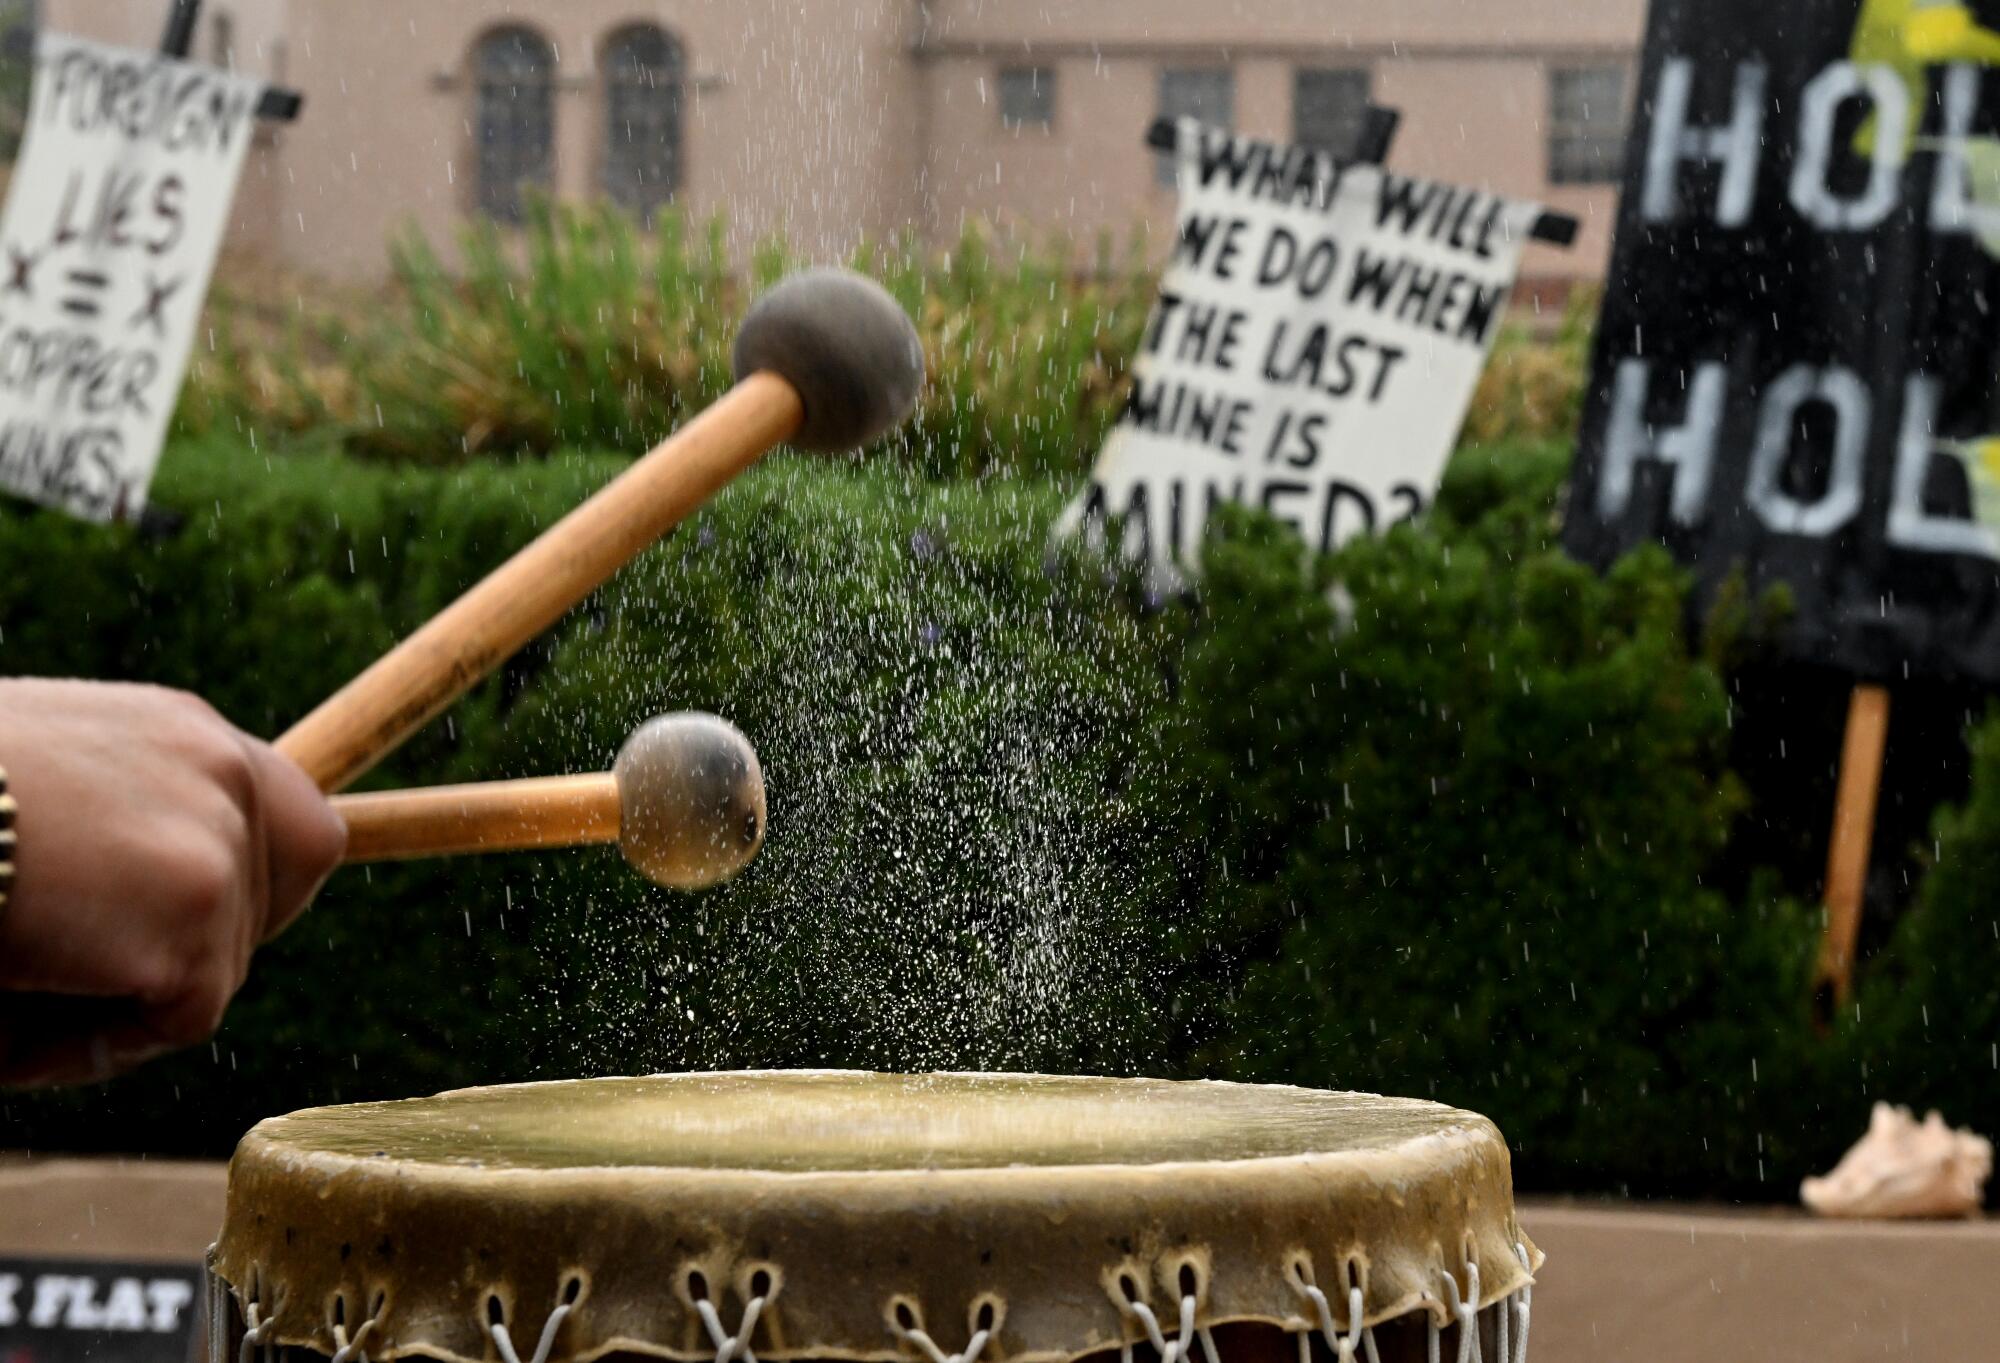 A drum with protest signs in the background